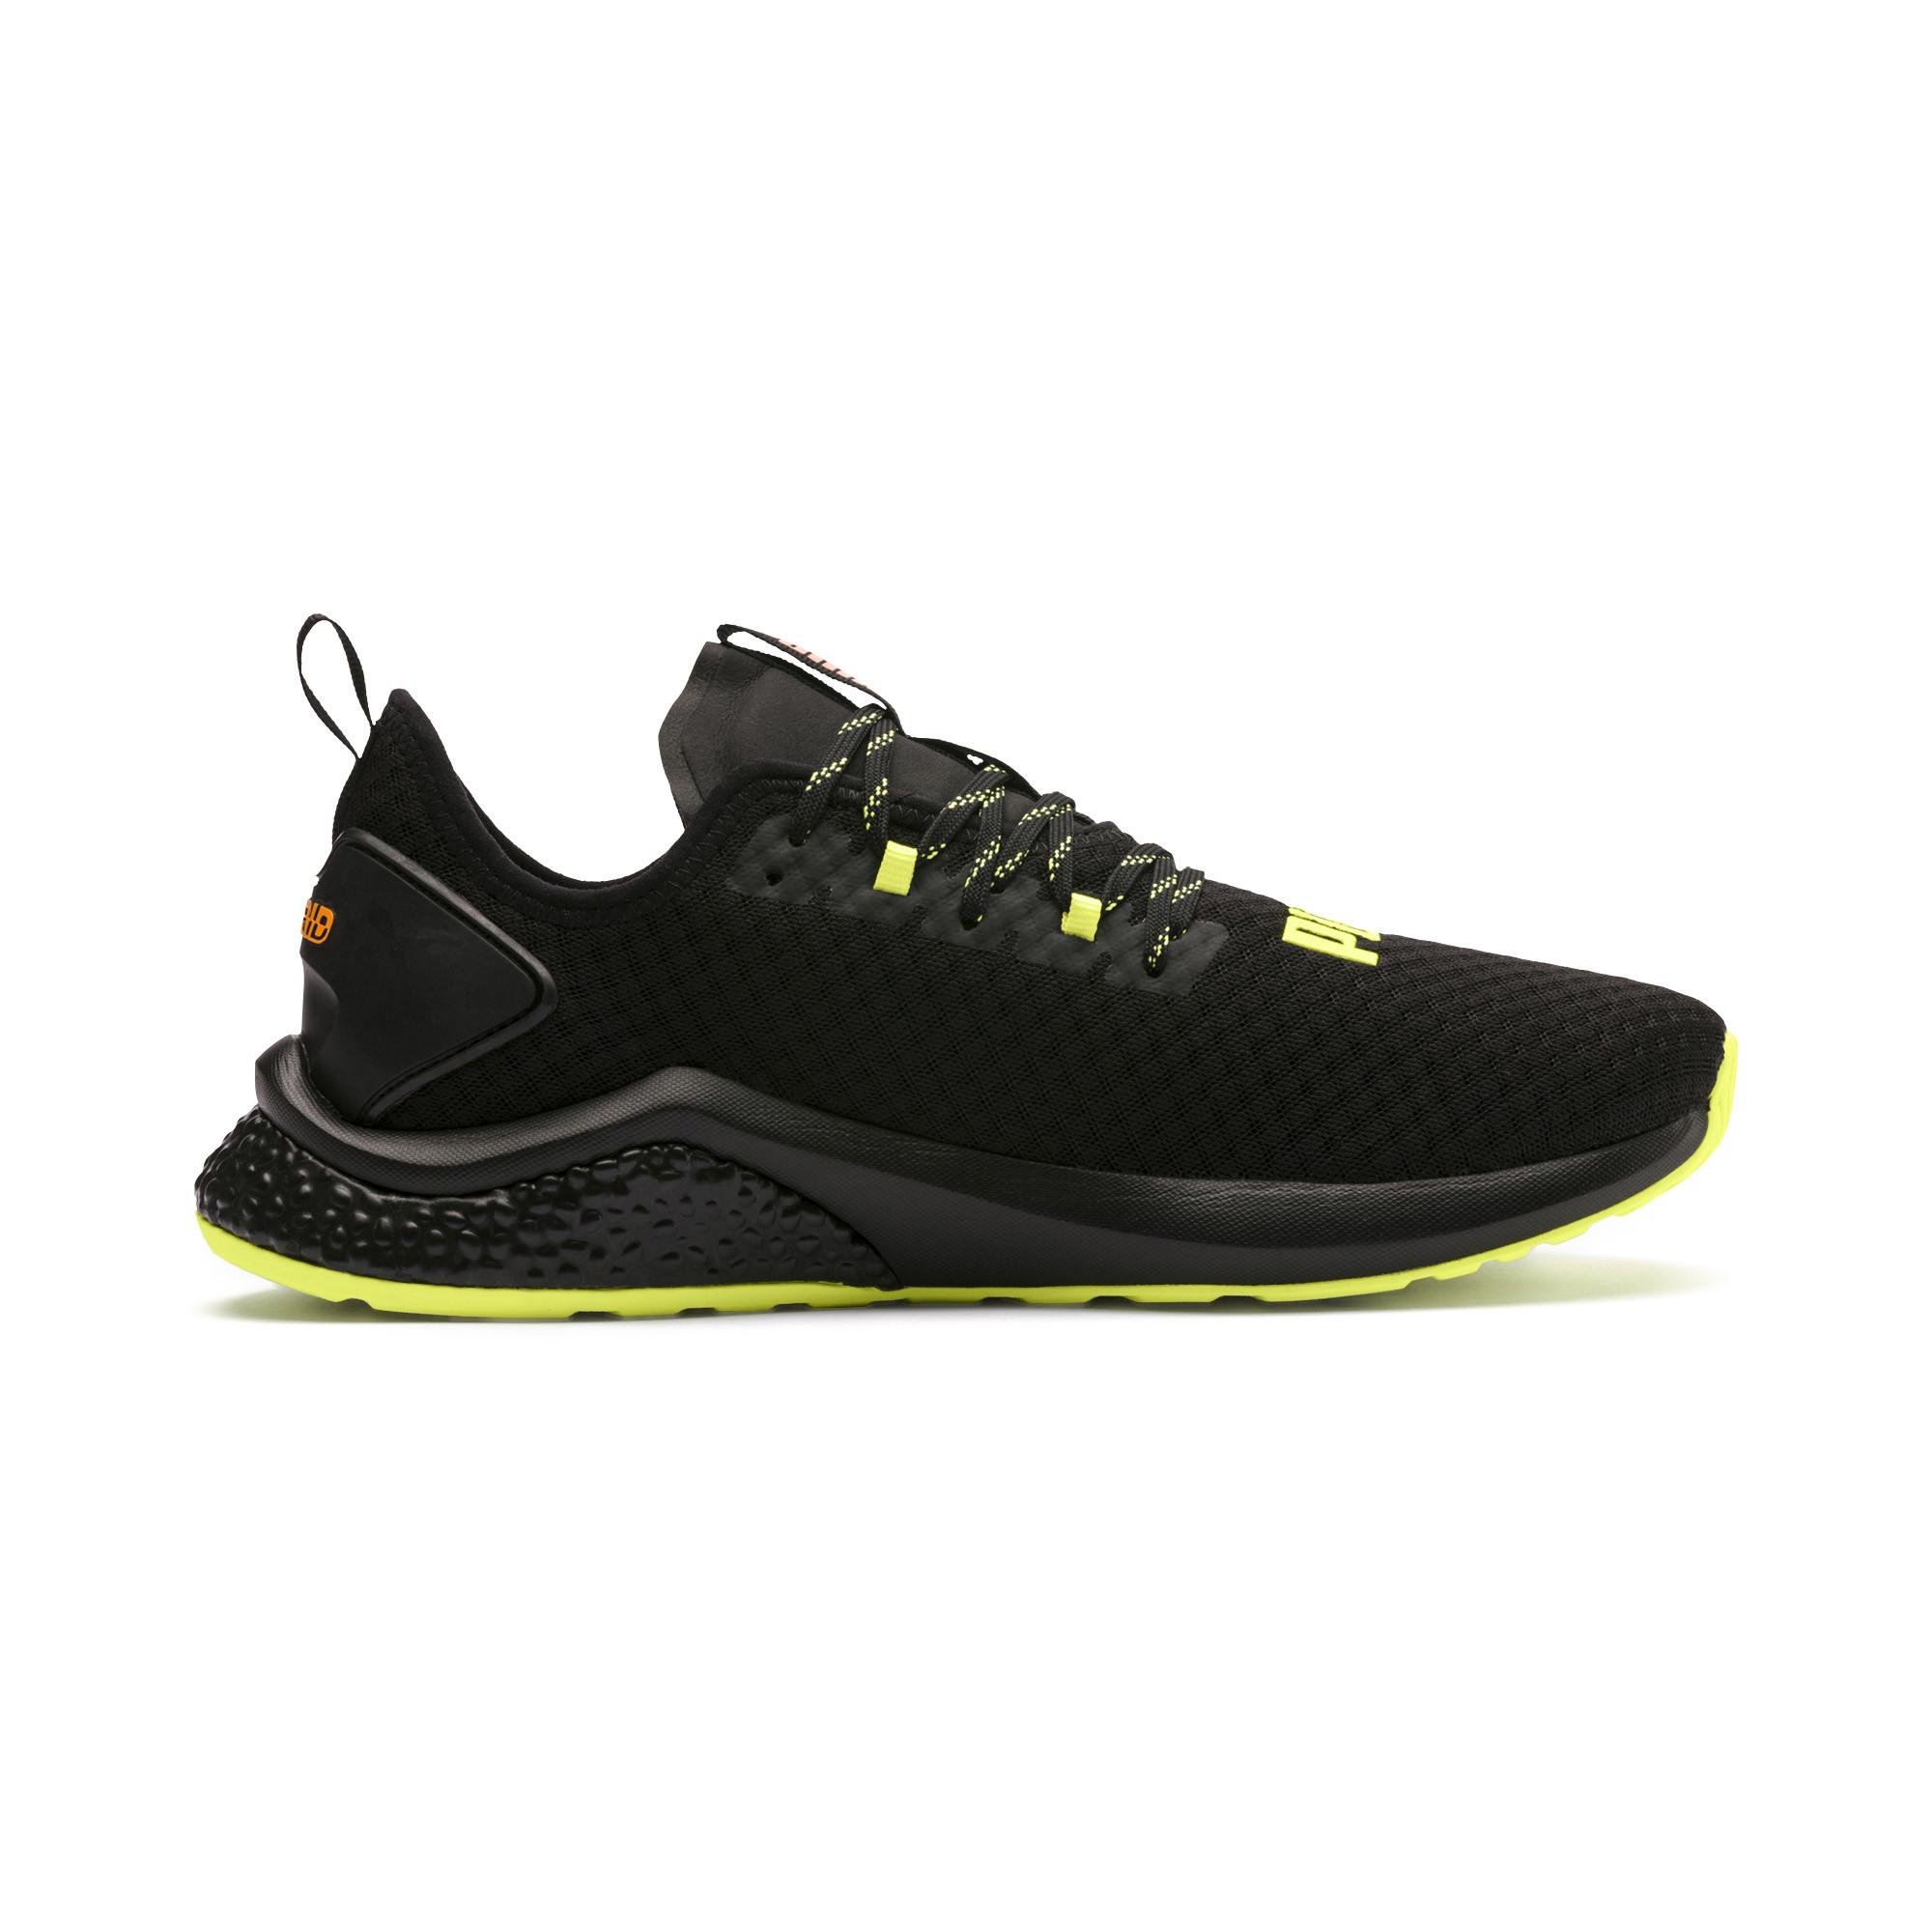 Lyst - PUMA Hybrid Nx Daylight Competition Running Shoes in Black for Men